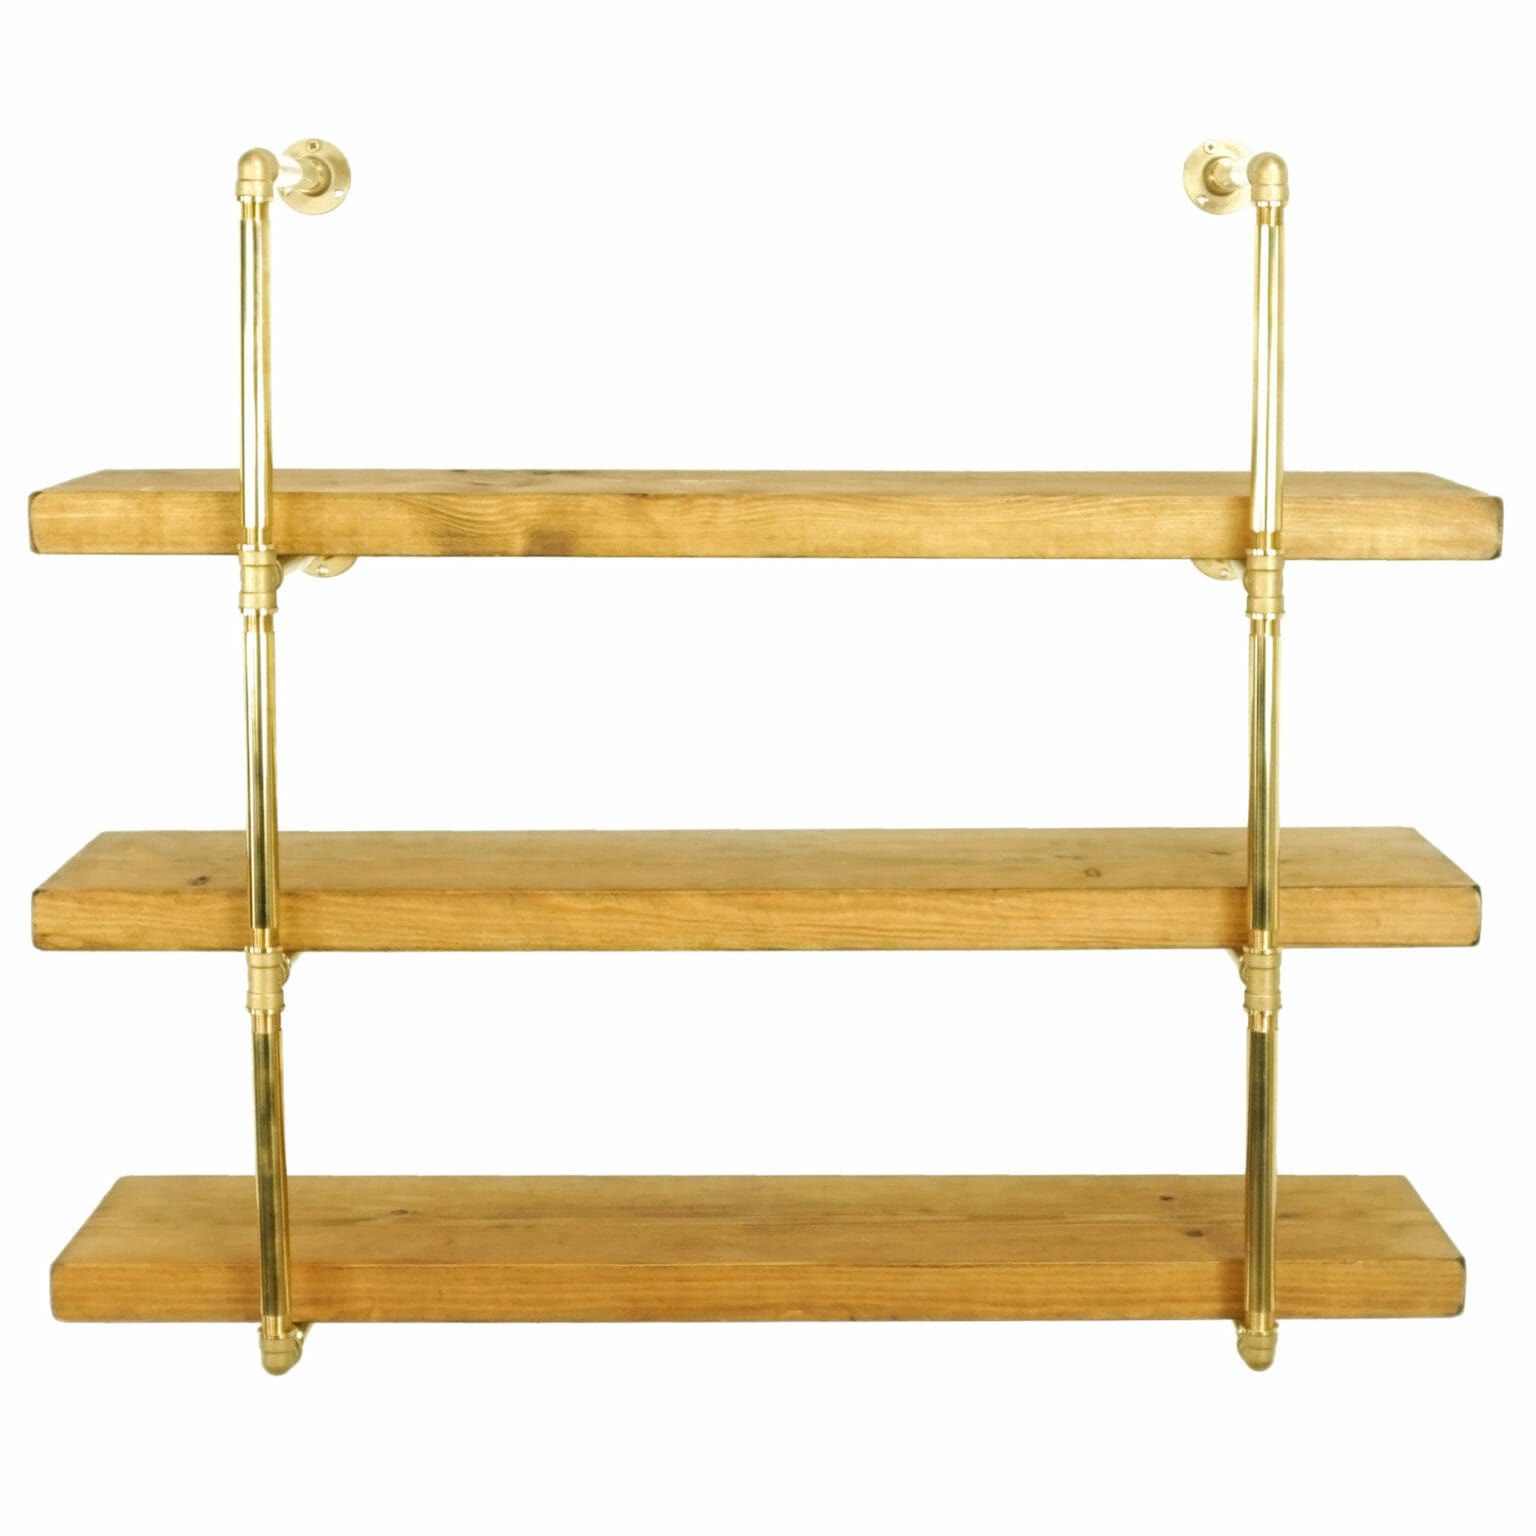 Solid Brass Reclaimed Timber Shelving Unit - Pipe Dream Furniture